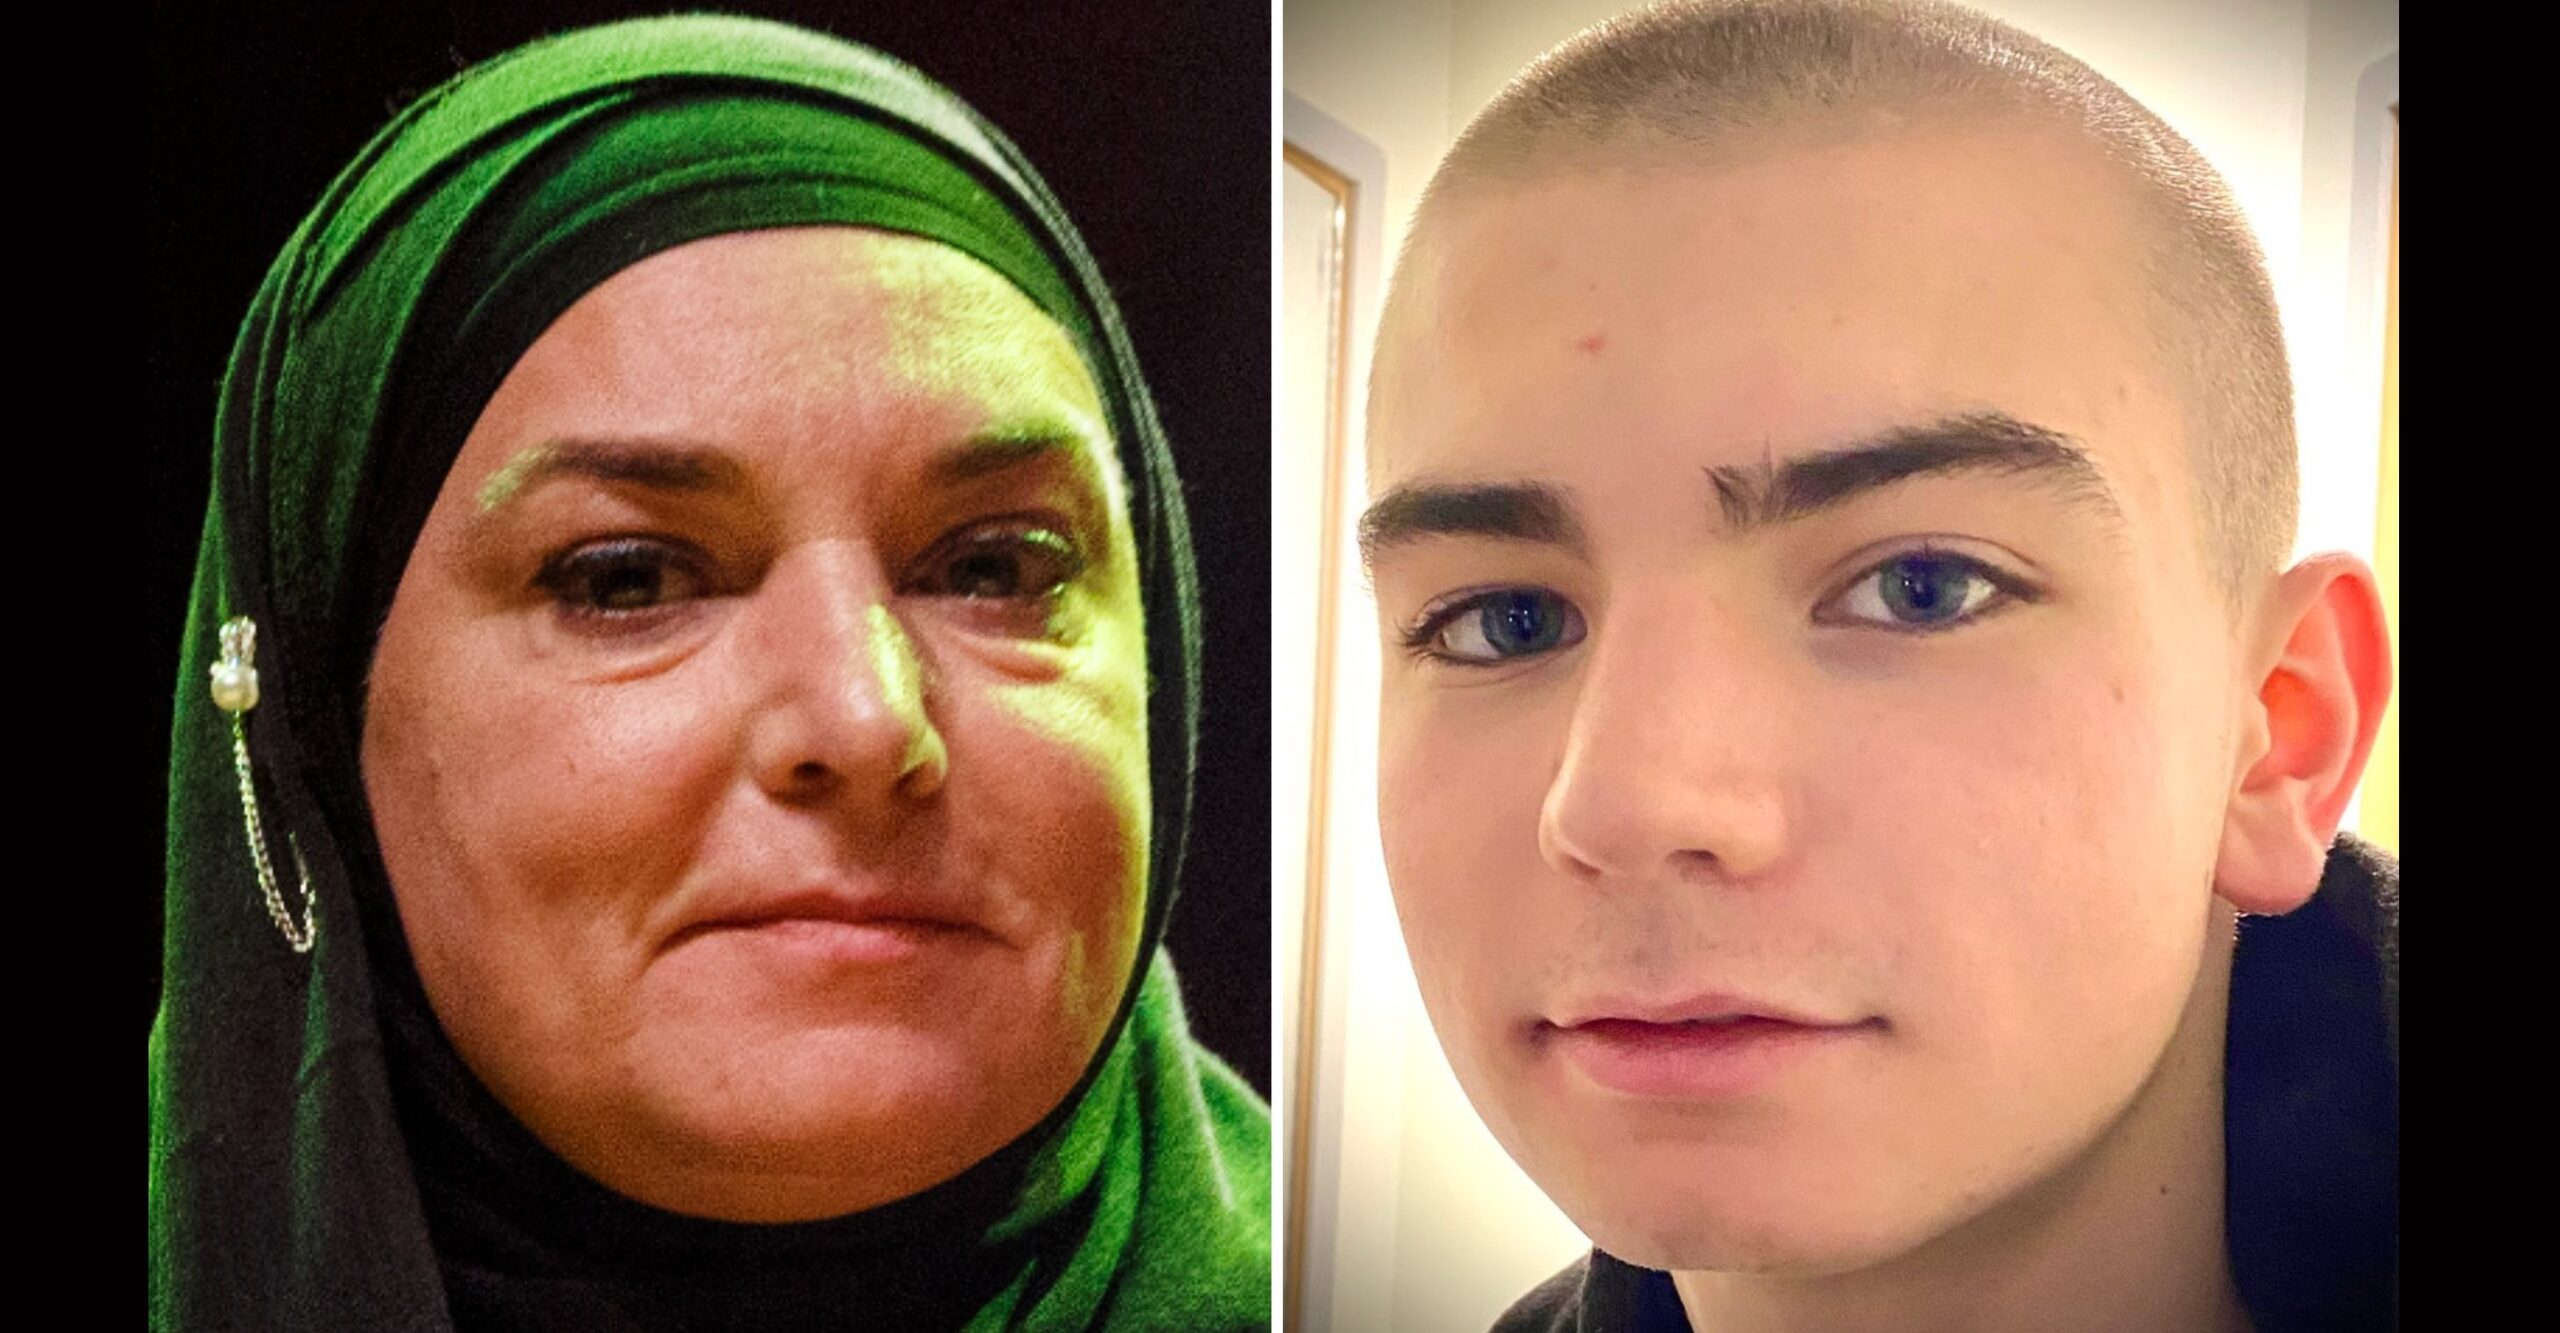 Sinéad O’Connor Expressed Heartache Over Son’s Suicide Days Before Her Own Death